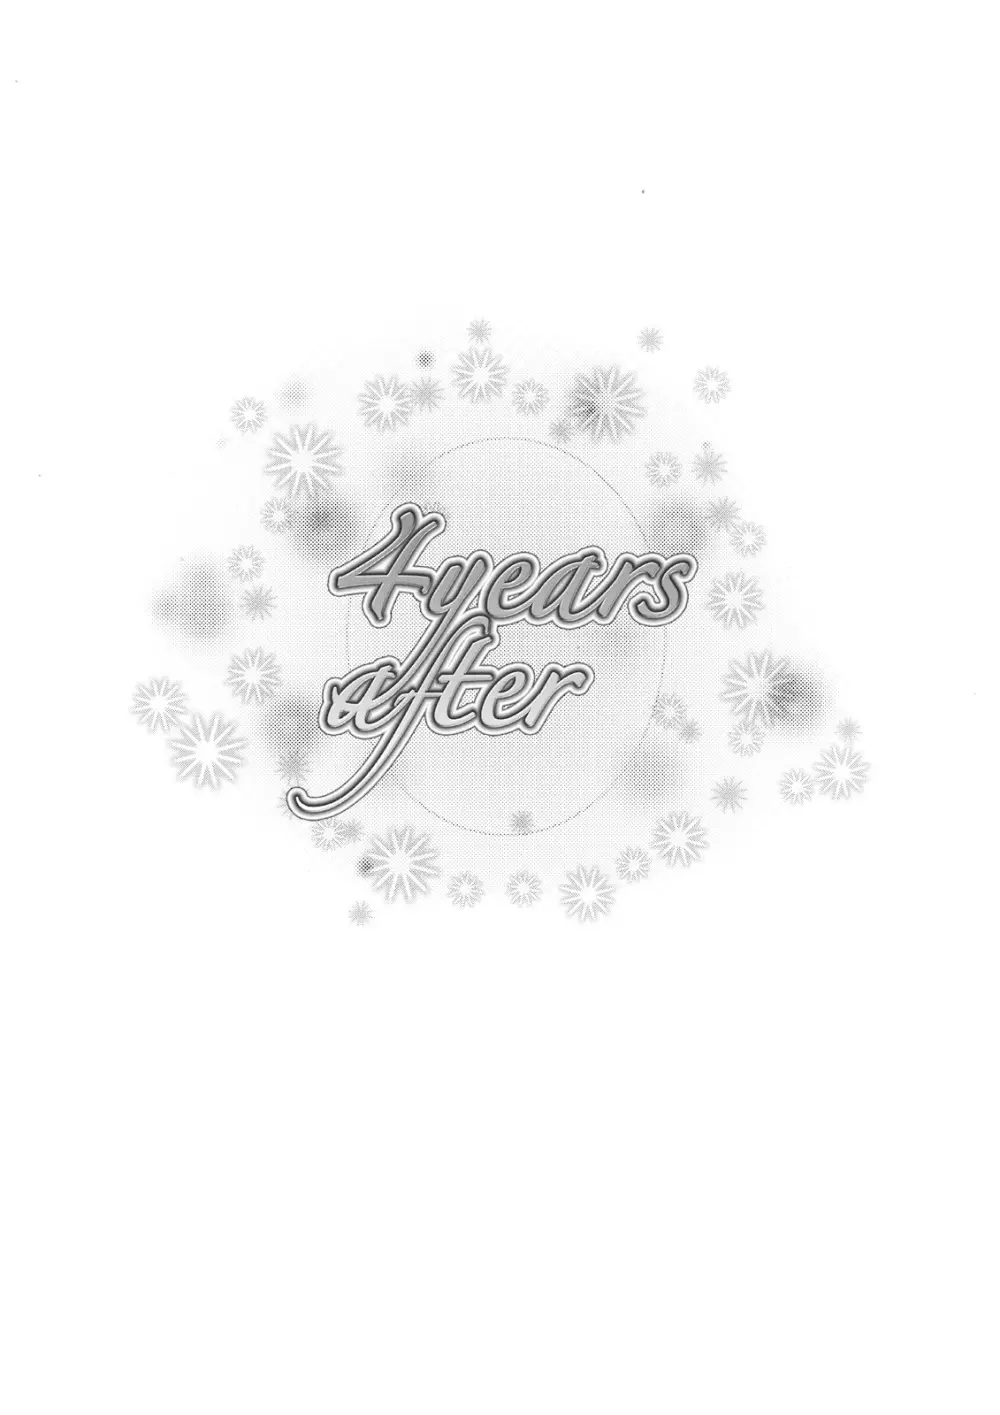 4years after 2ページ